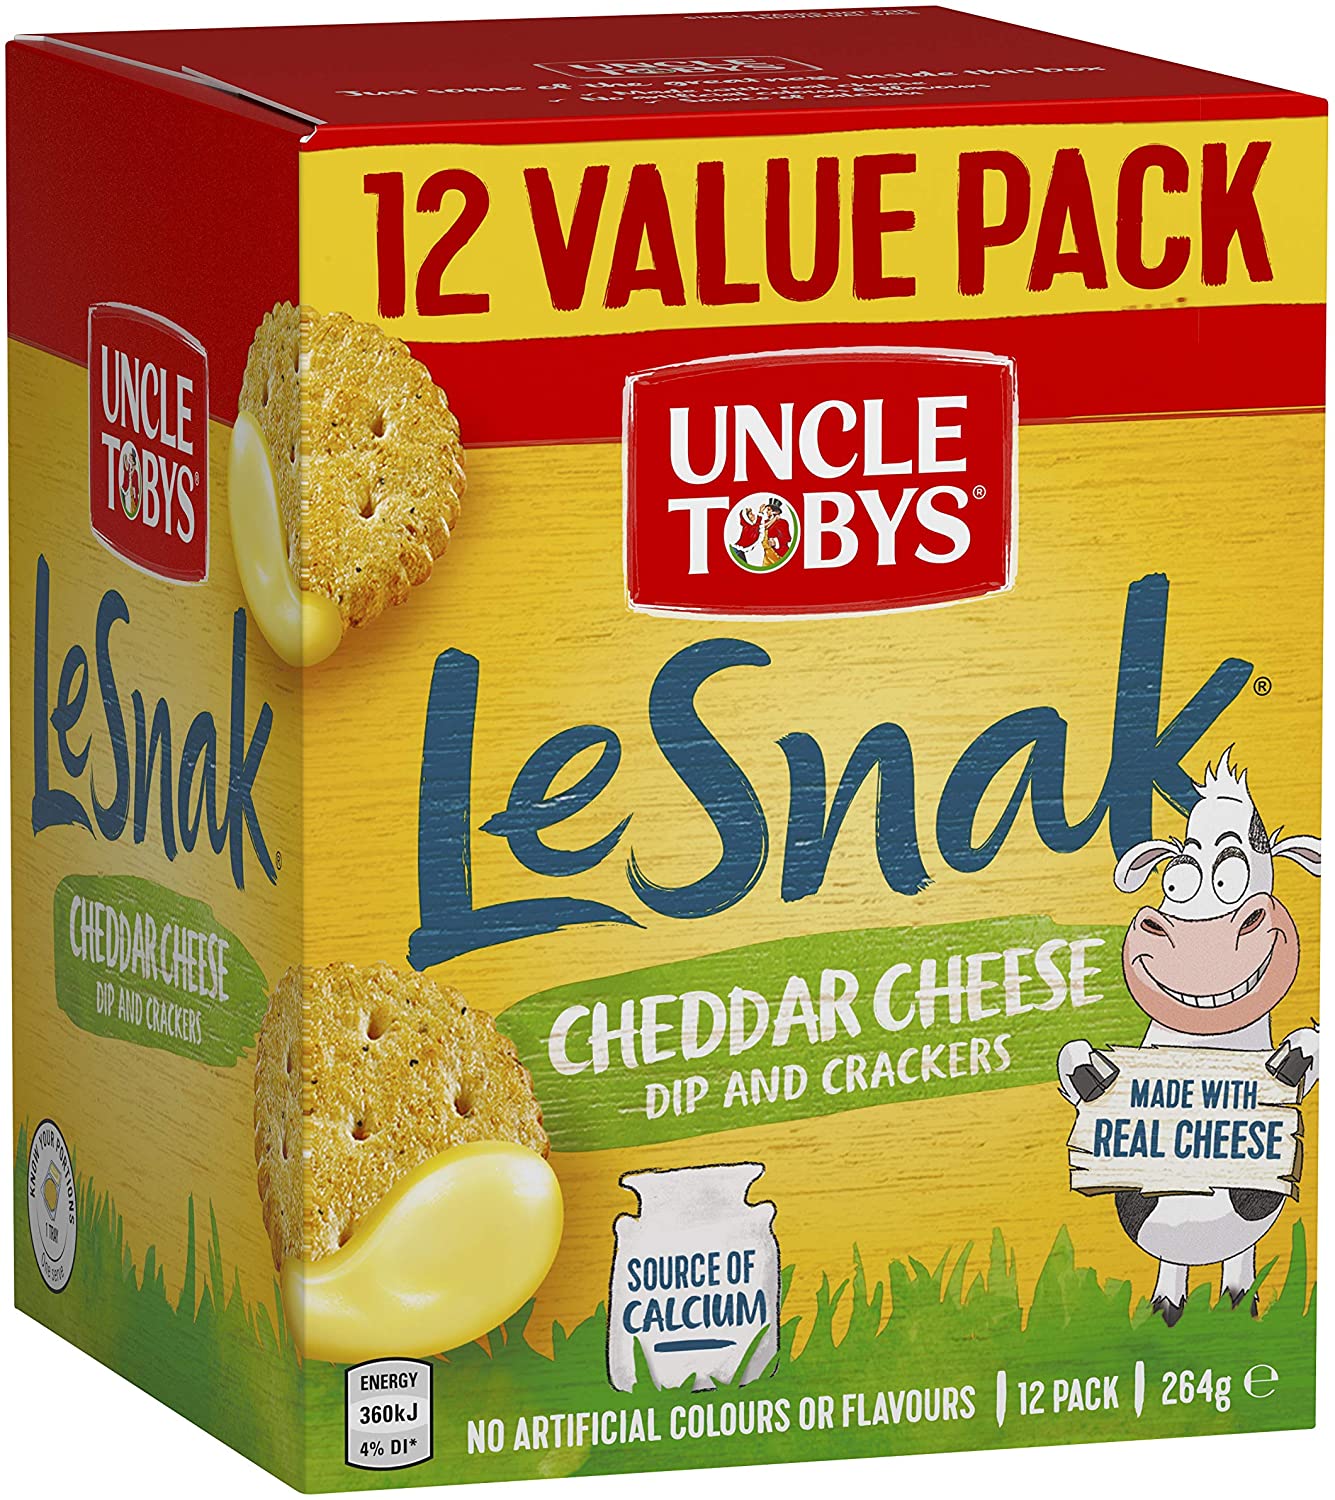 UNCLE TOBYS Cheddar Cheese Dip & Cracker Value Pack -best price deal- now $5+free delivery